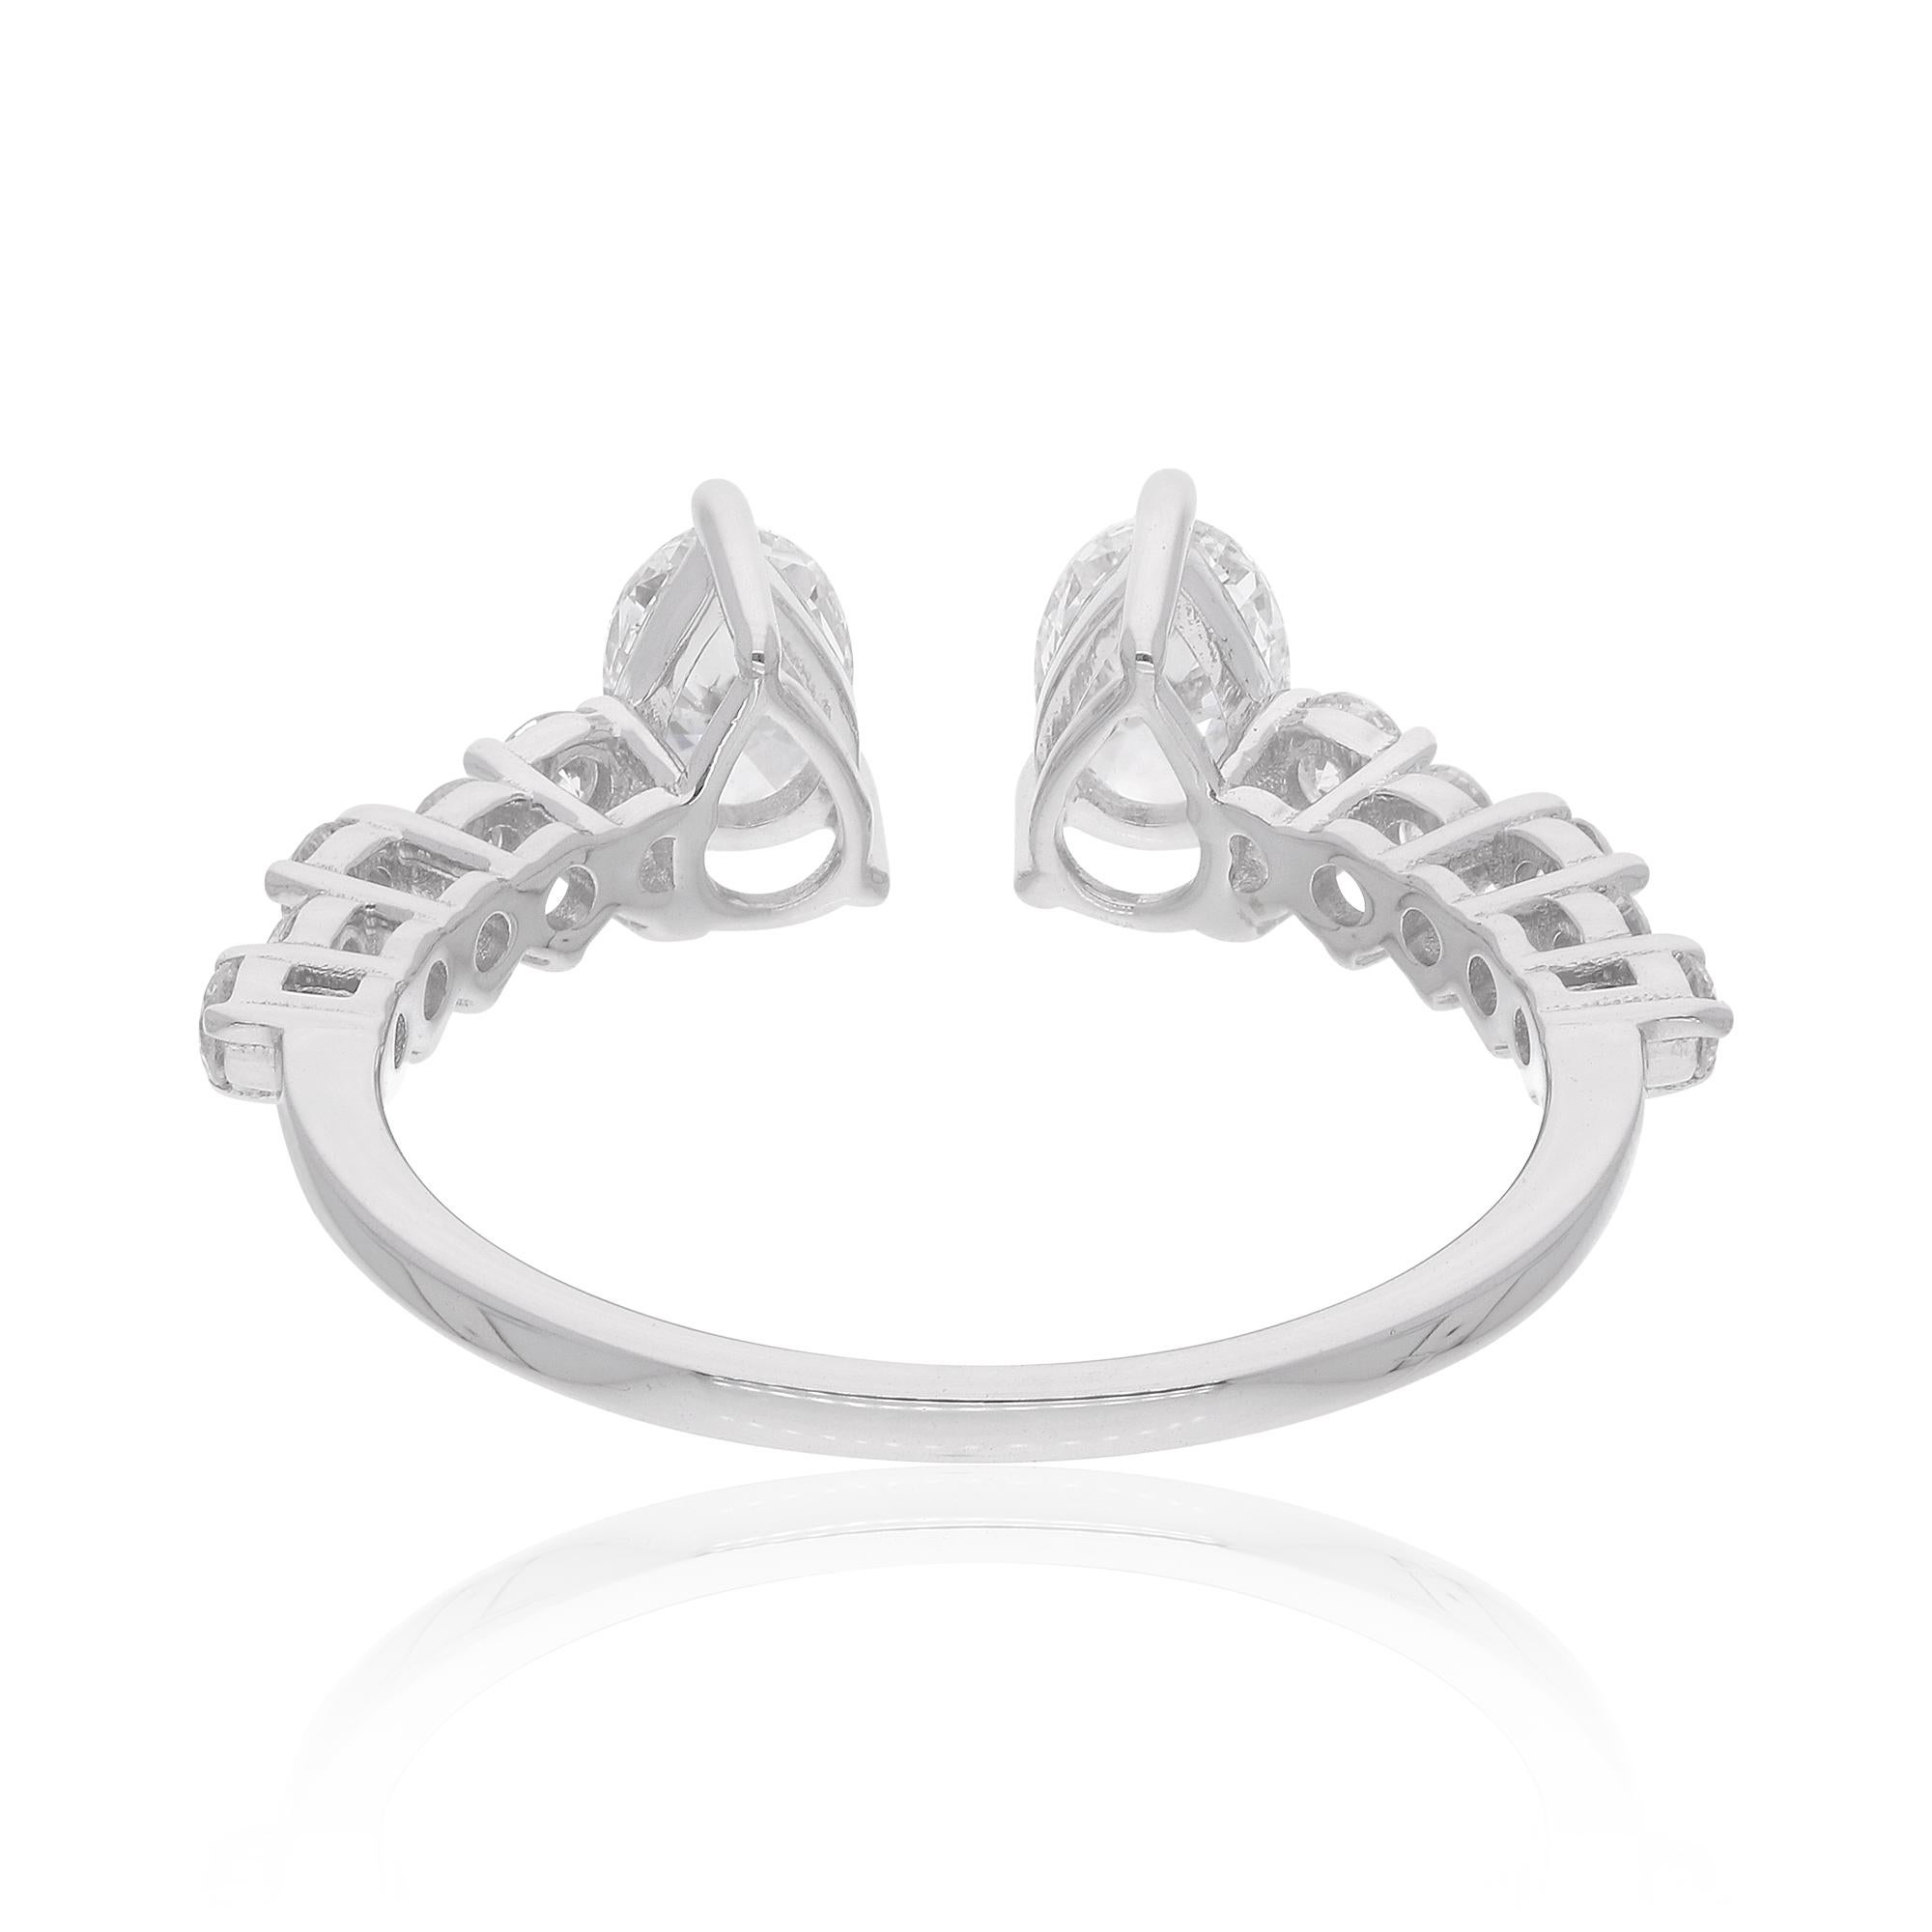 The cuff ring design features an open-ended band that can be adjusted to fit comfortably on the finger. This design adds a modern and edgy twist to the traditional ring style.

Item Code :- SER-23900B
Gross Wt. :- 2.27 gm
18k White Gold Wt. :- 2.09